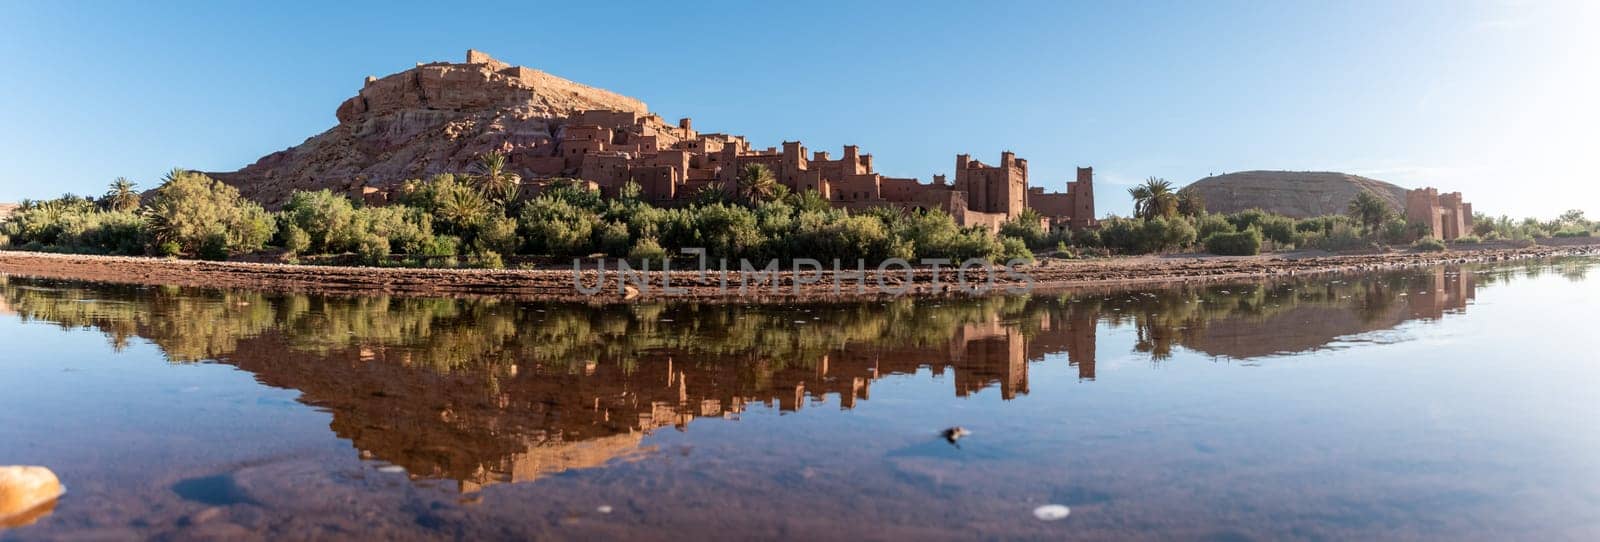 Sunrise over the beautiful historic town Ait Ben Haddou, famous berber town with many kasbahs built of clay, UNESCO world heritage by imagoDens